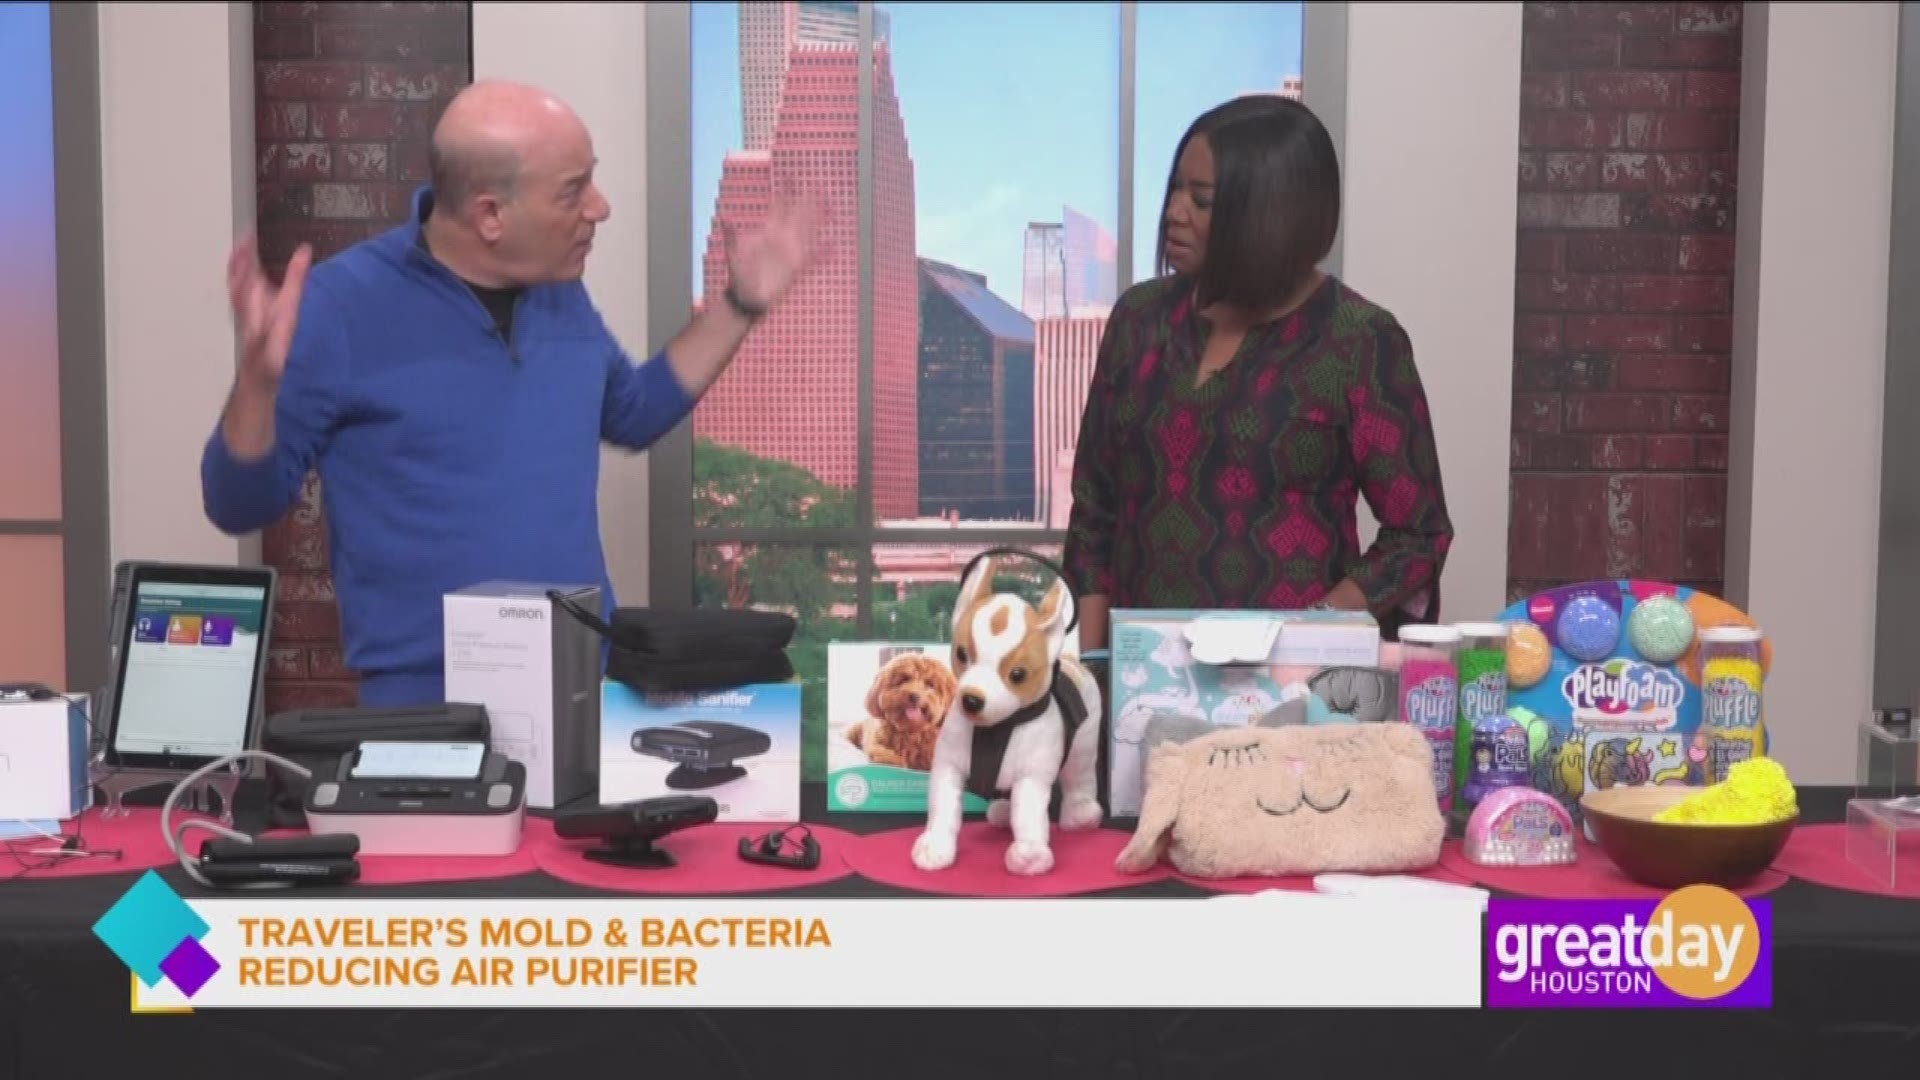 "Gadget Guy", Steve Greenberg, stopped by Great Day Houston with wellness gadgets for the whole family.